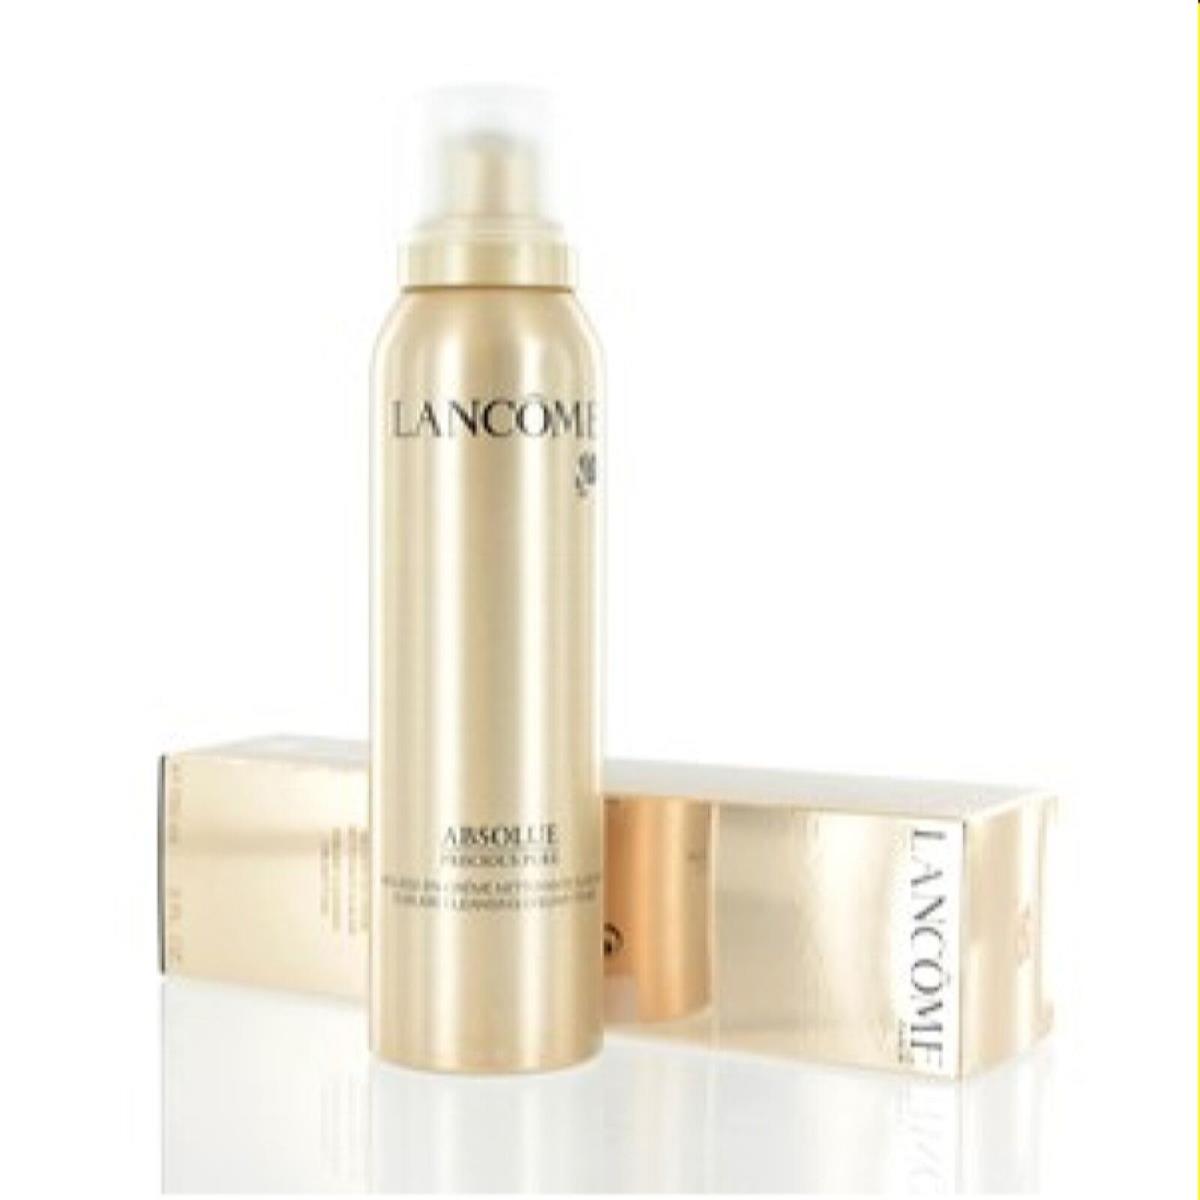 Lancome Absolue Precious Pure Cleansing Foam 5.0 OzL523380